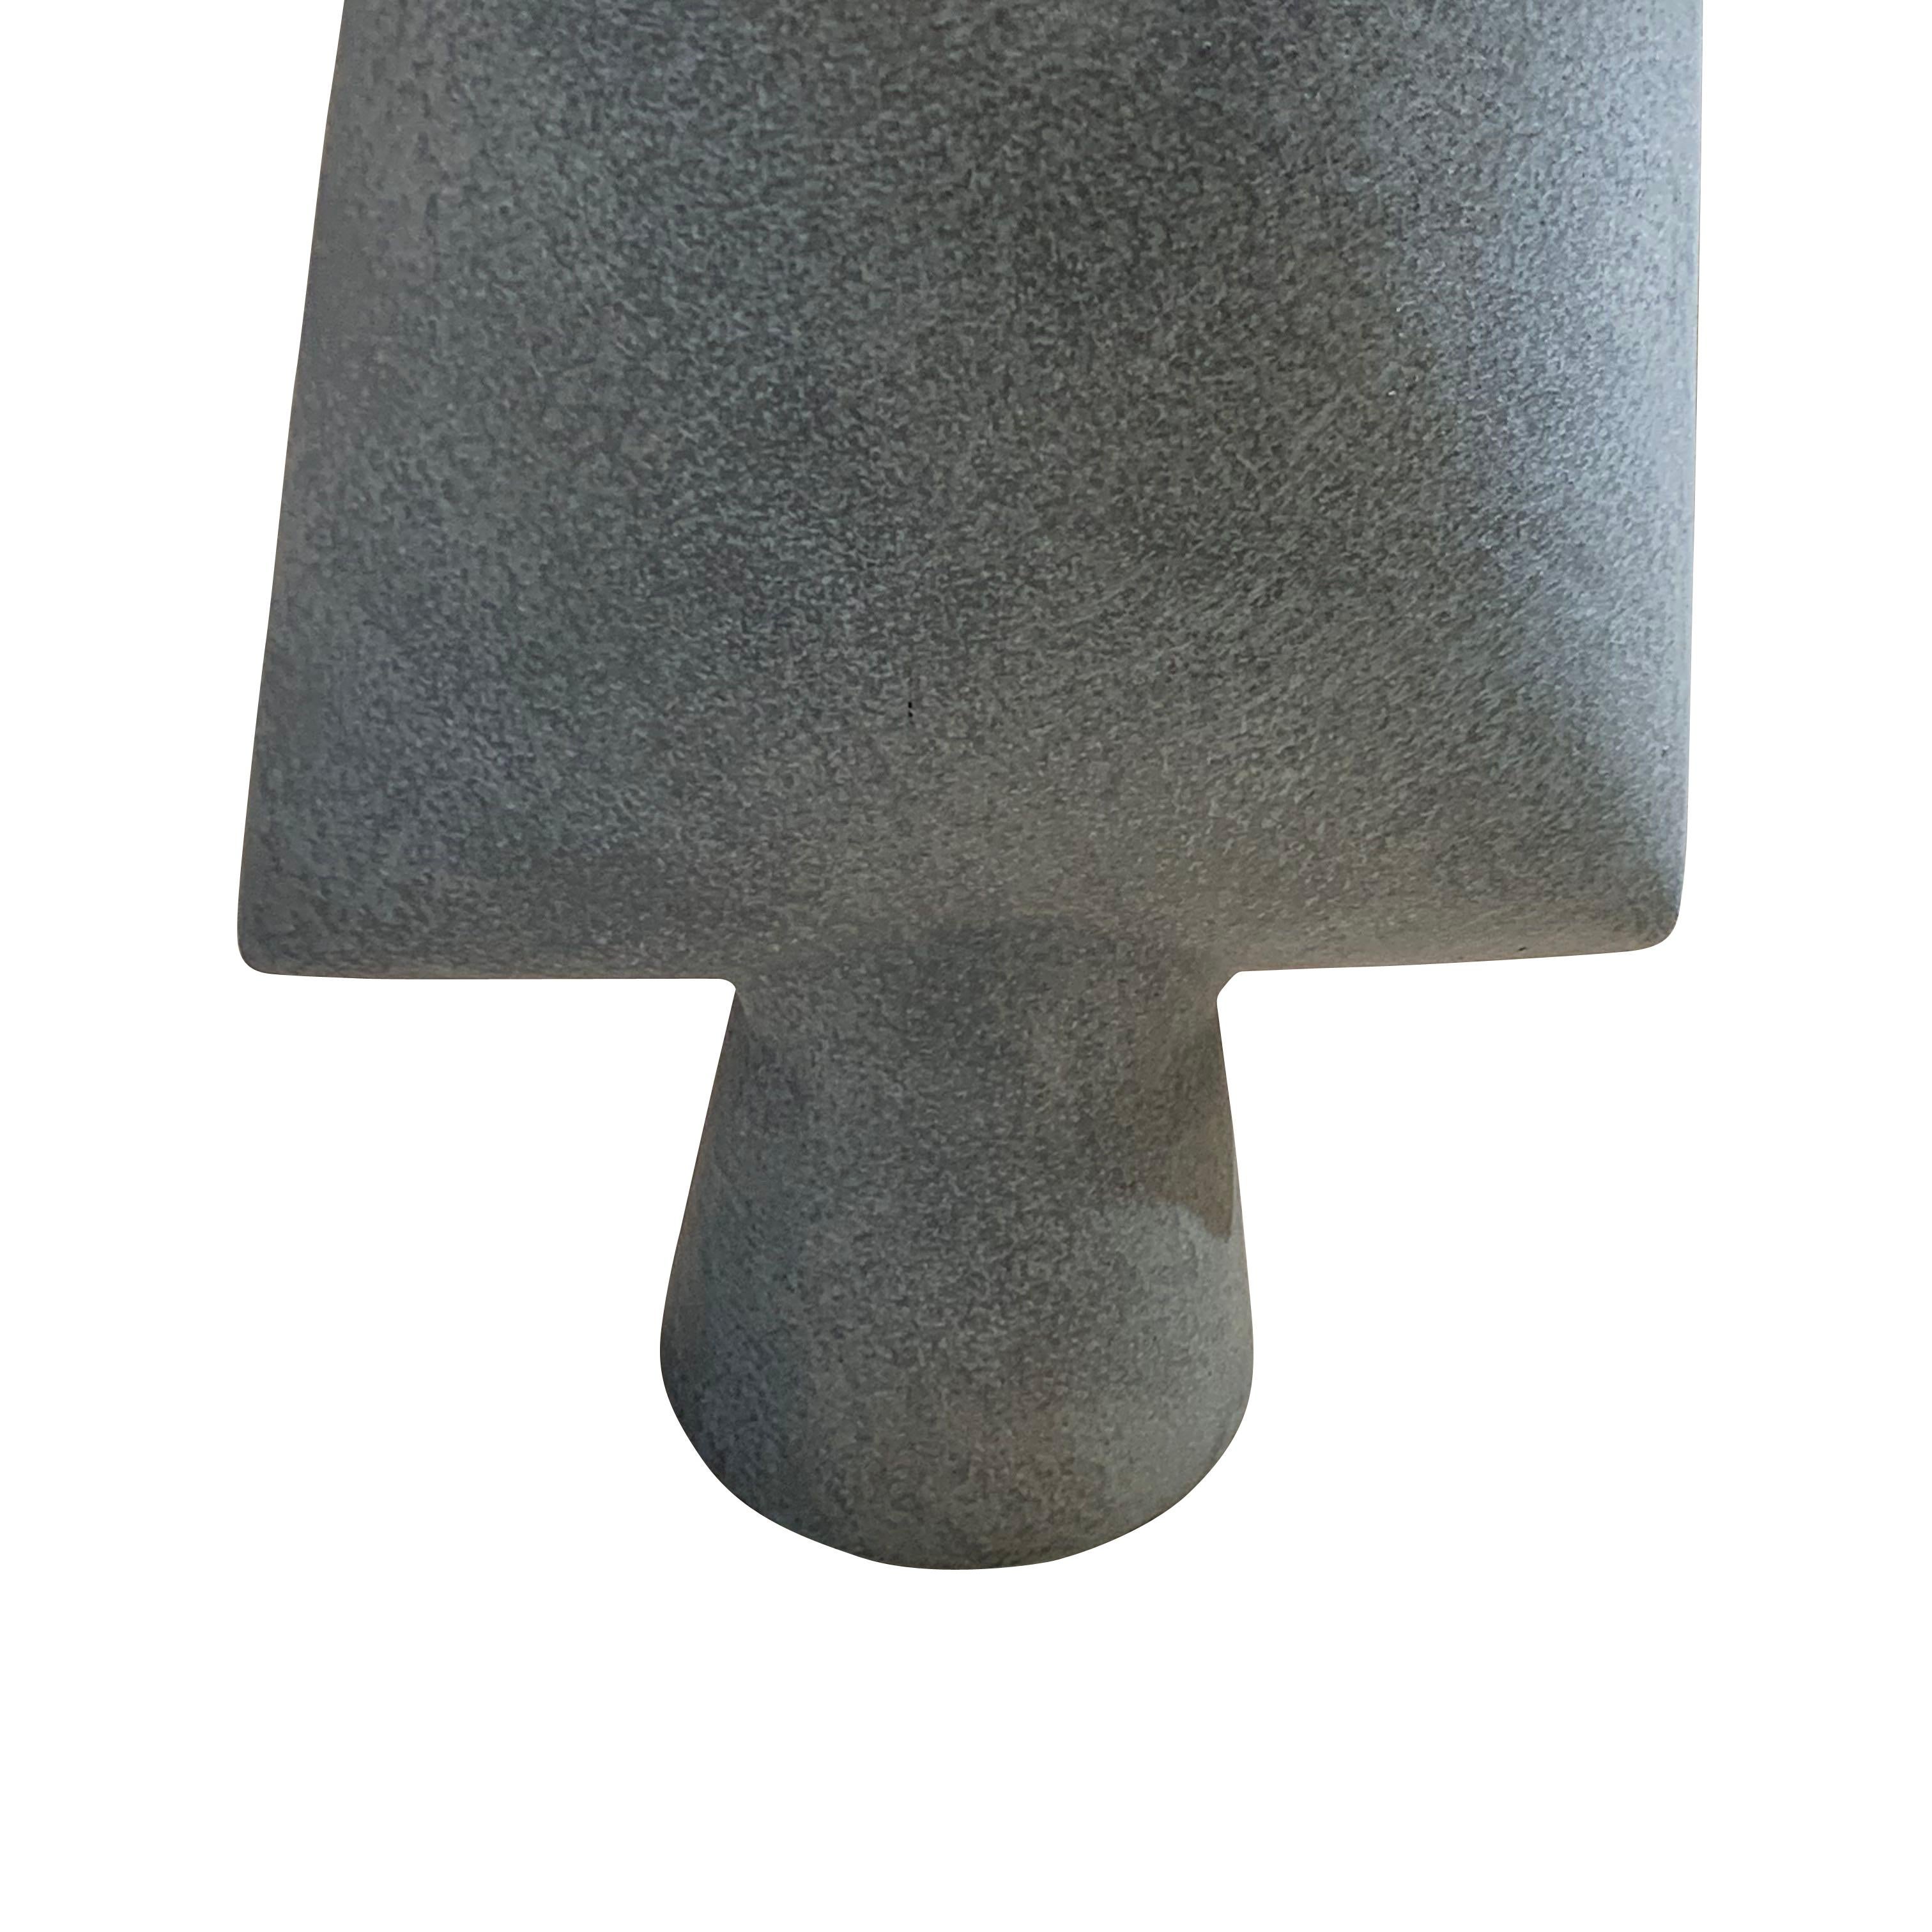 Contemporary Danish design small square shaped vase on cylinder base
Matte grey glaze.
One of a collection of many shapes and sizes.
ARRIVAL TBD
 